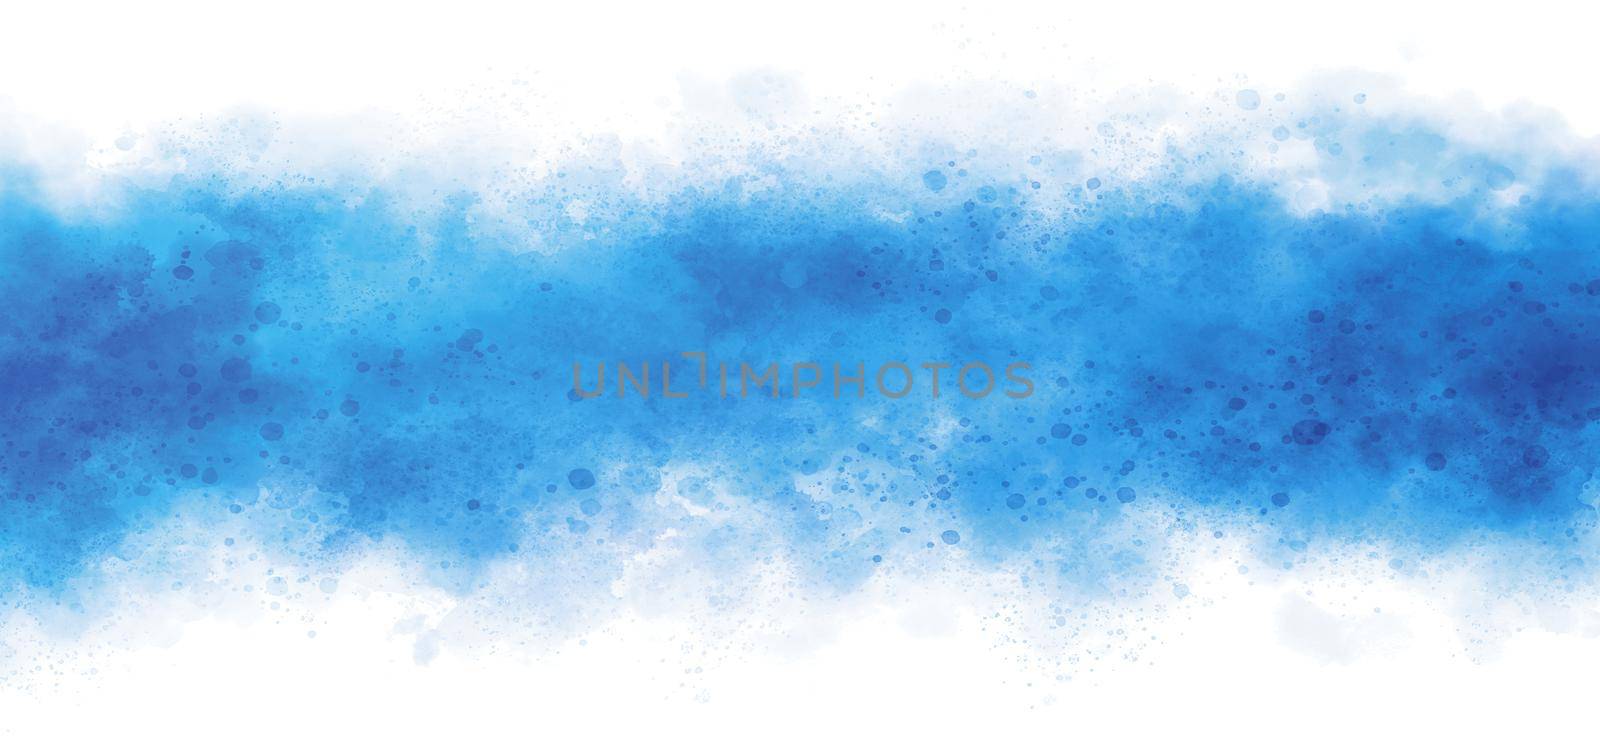 Blue watercolor on white background illustration by Myimagine